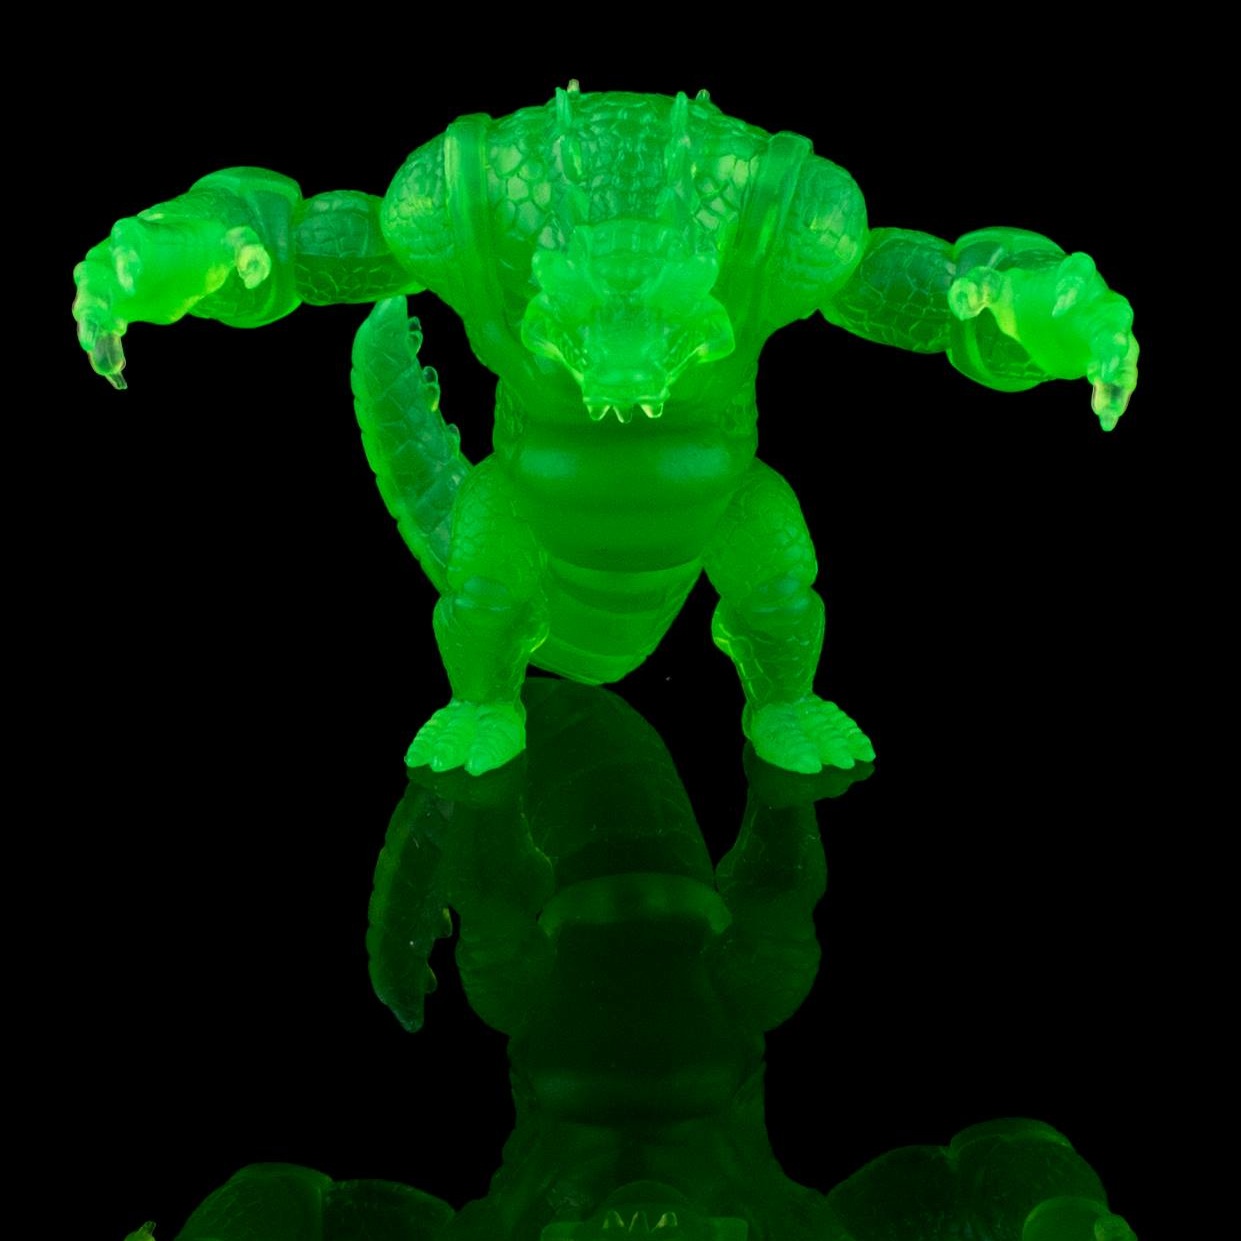 Spotted at Glyos HQthis amazing repackaged Getter Drago…